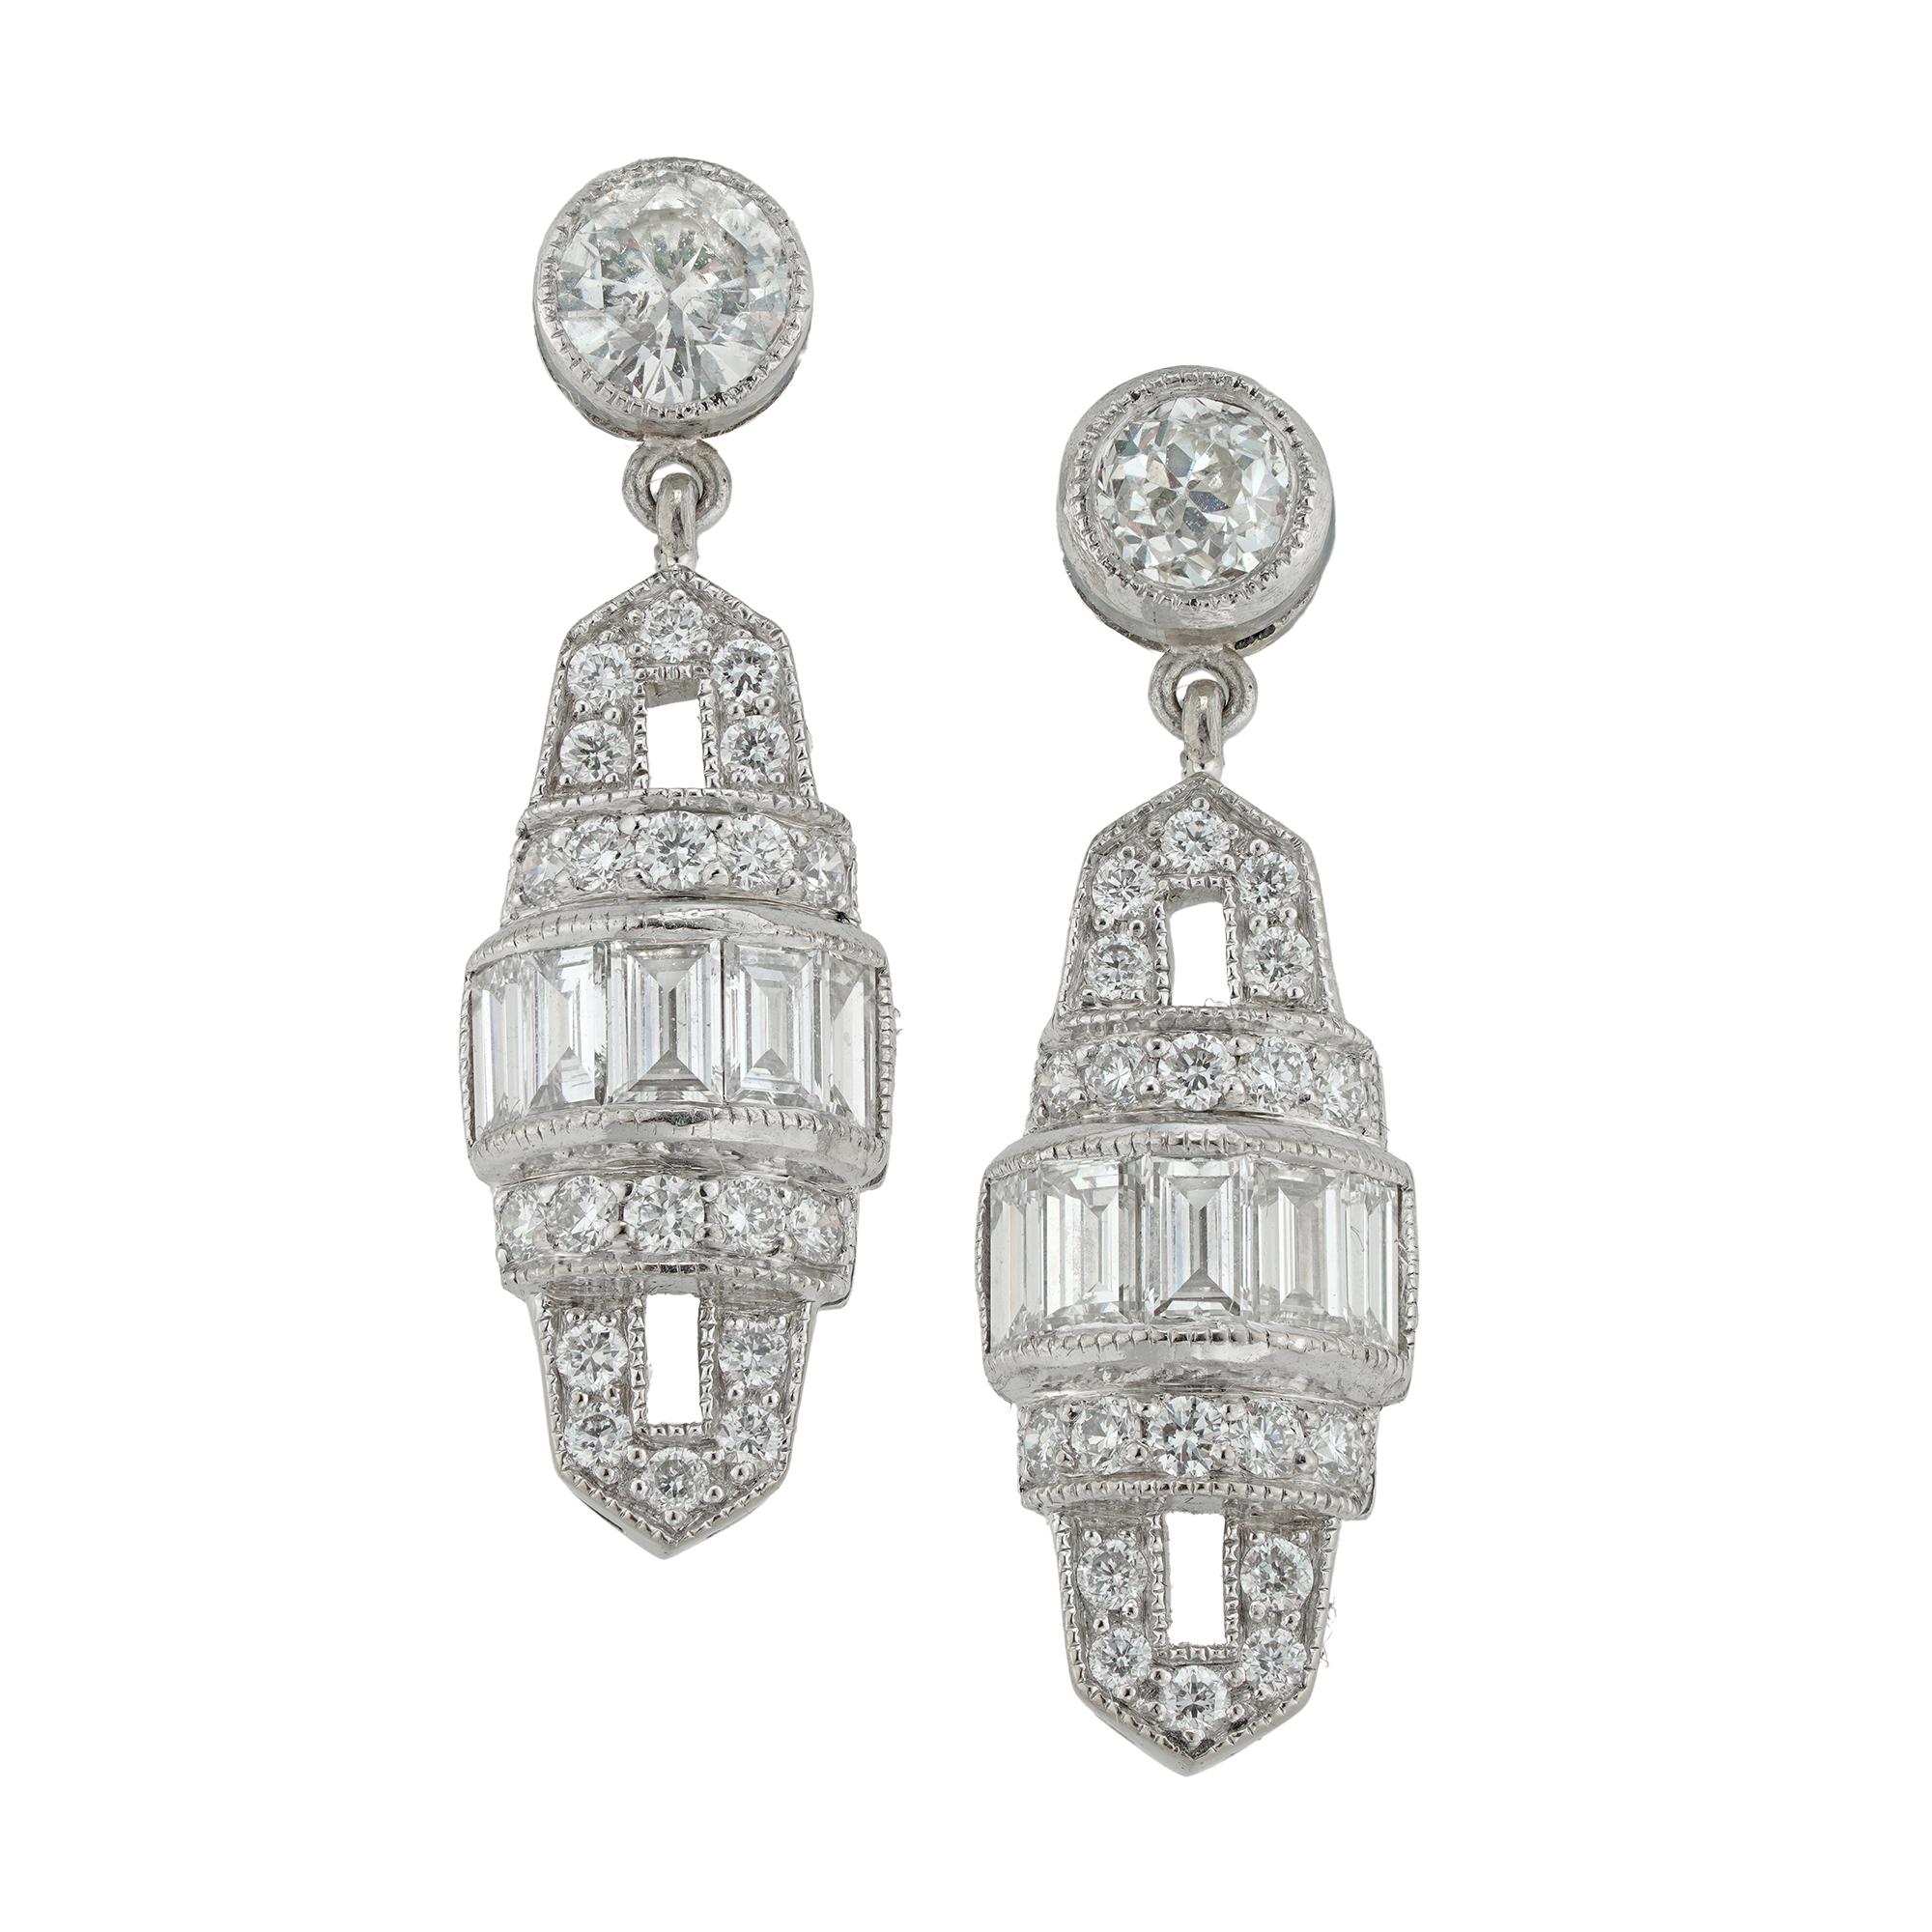 A pair of Art Deco style diamond drop earrings, each with a barrel-shaped openwork diamond plaque, centrally set with a line of baguette-cut diamonds within circular-cut pierced diamond borders, all suspended from a single diamond, diamonds